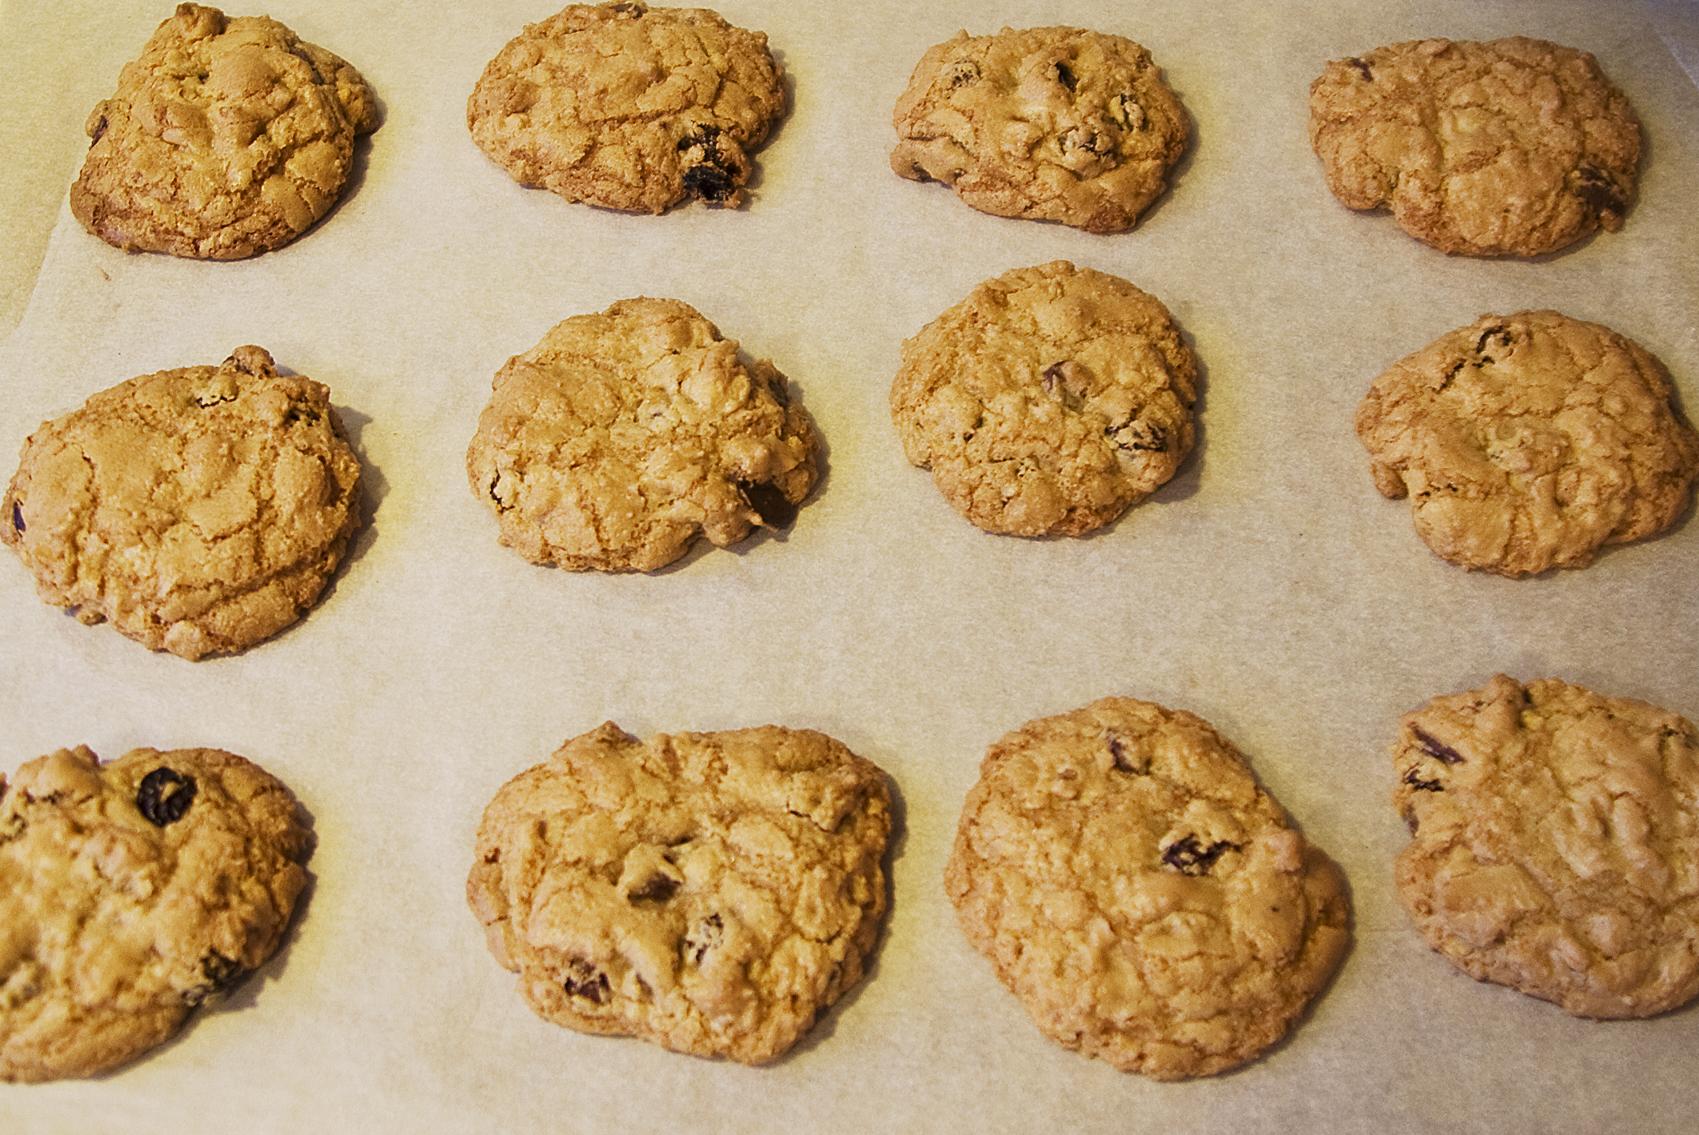  Chocolate and walnuts, a match made in cookie heaven.